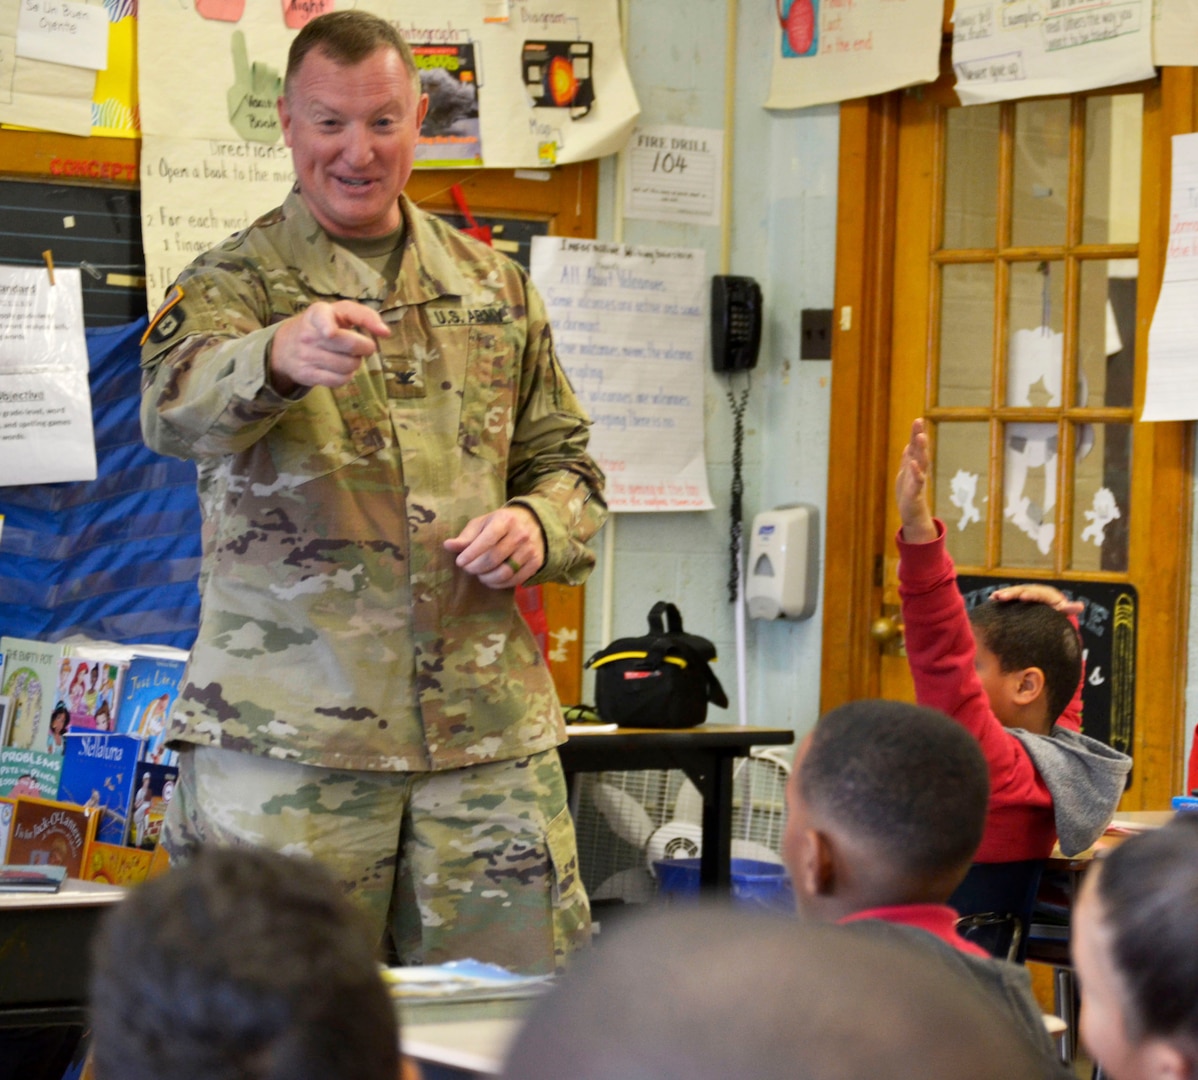 Army Col. Matthew Voyles, DLA Troop Support Medical supply chain director, talks with students during a Veterans Day event at the Gilbert Spruance Elementary School Nov. 7, 2019 in Philadelphia.